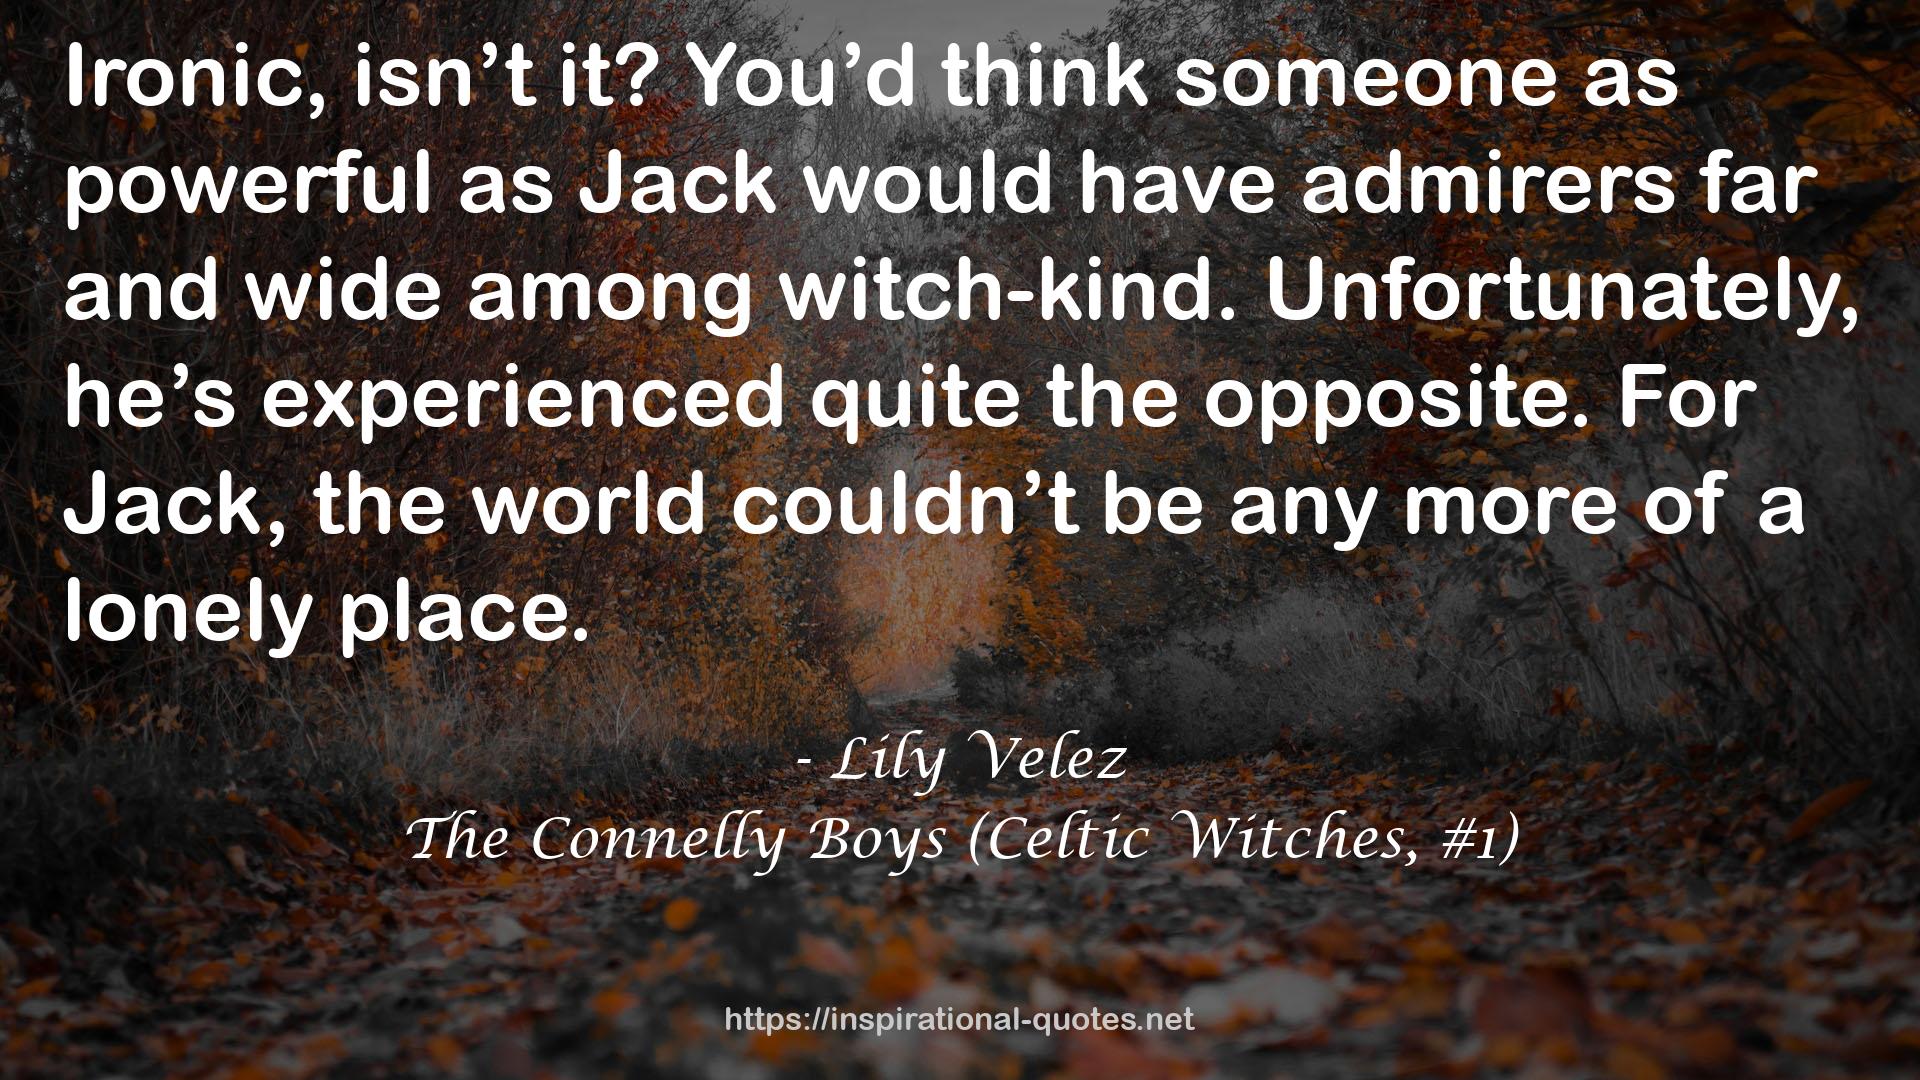 The Connelly Boys (Celtic Witches, #1) QUOTES